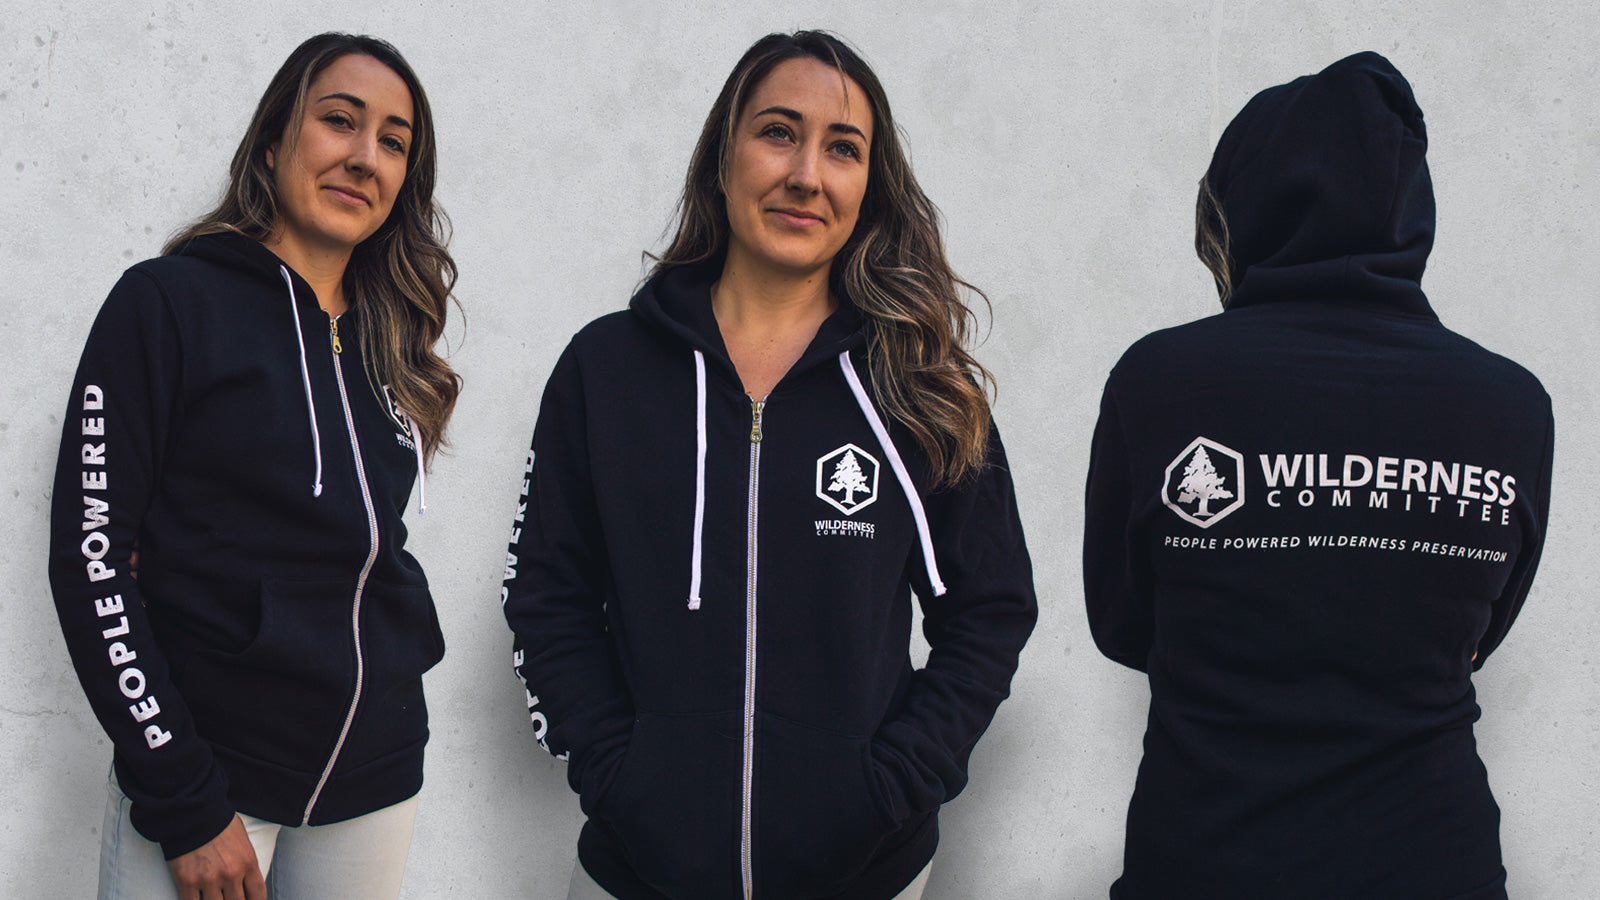 Three photos of a person wearing a hoodie. The hoodie has a Wilderness Committee logo over the left side of the chest, it says "People Powered" along the right arm and it has a logo of the Wilderness Committee on the back with text under it that says "People Powered Wilderness Preservation." End of image description.